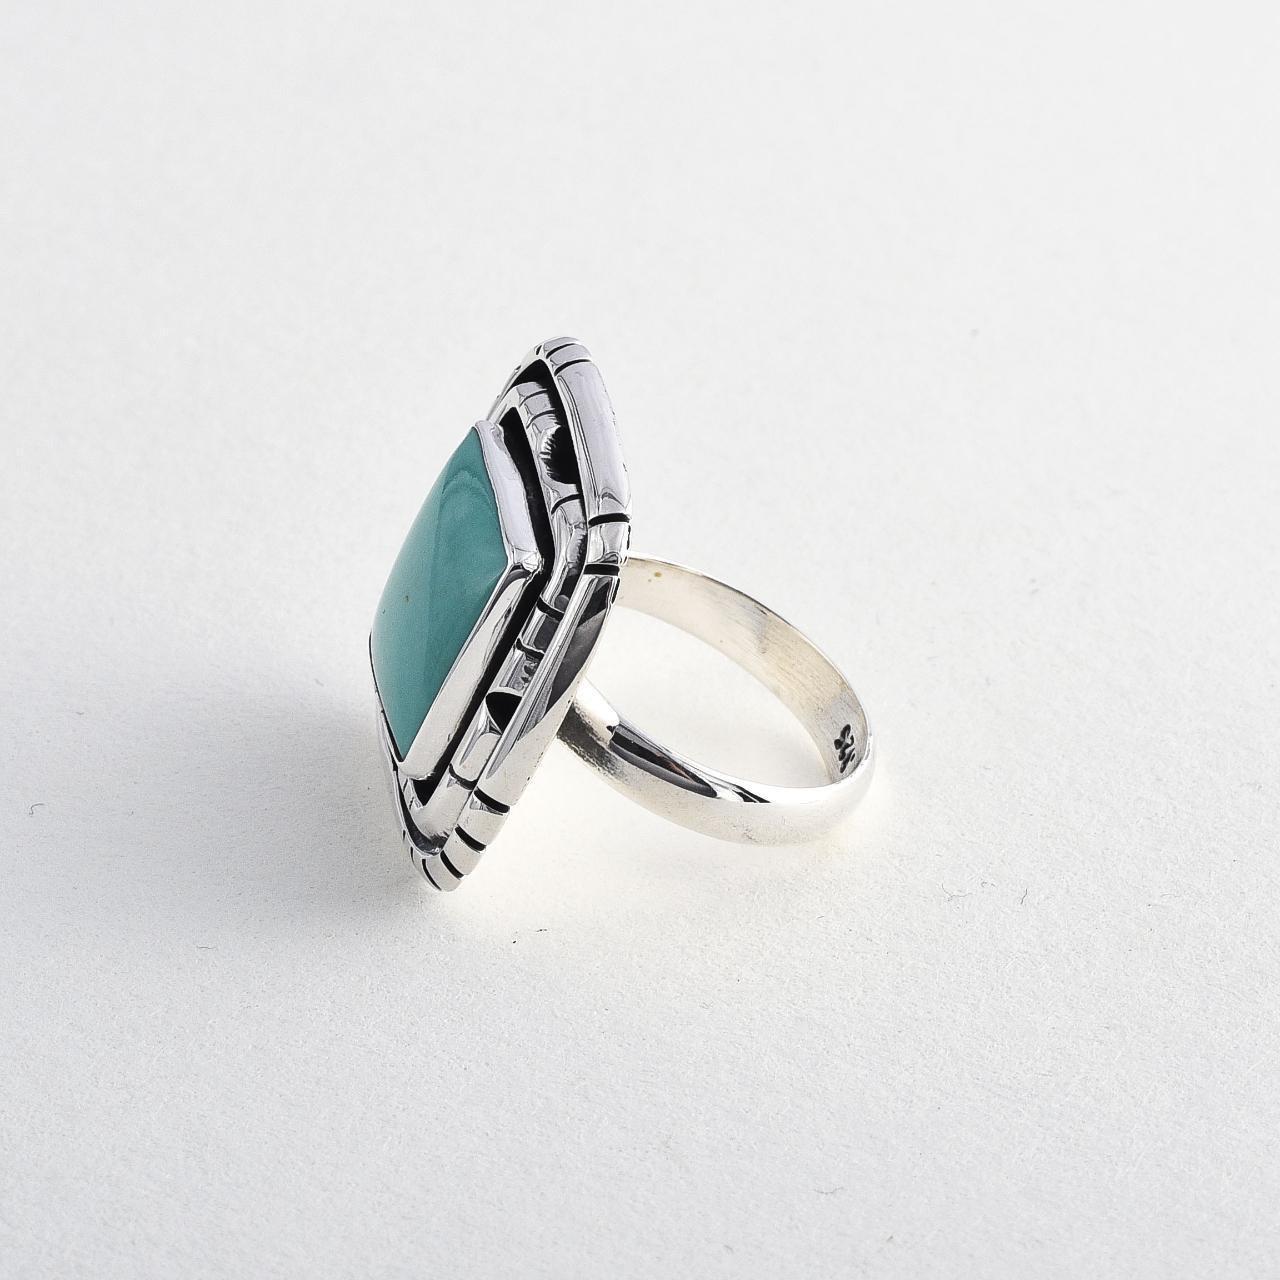 Product Image 3 - Sterling 925 Large Turquoise Ring

Sterling